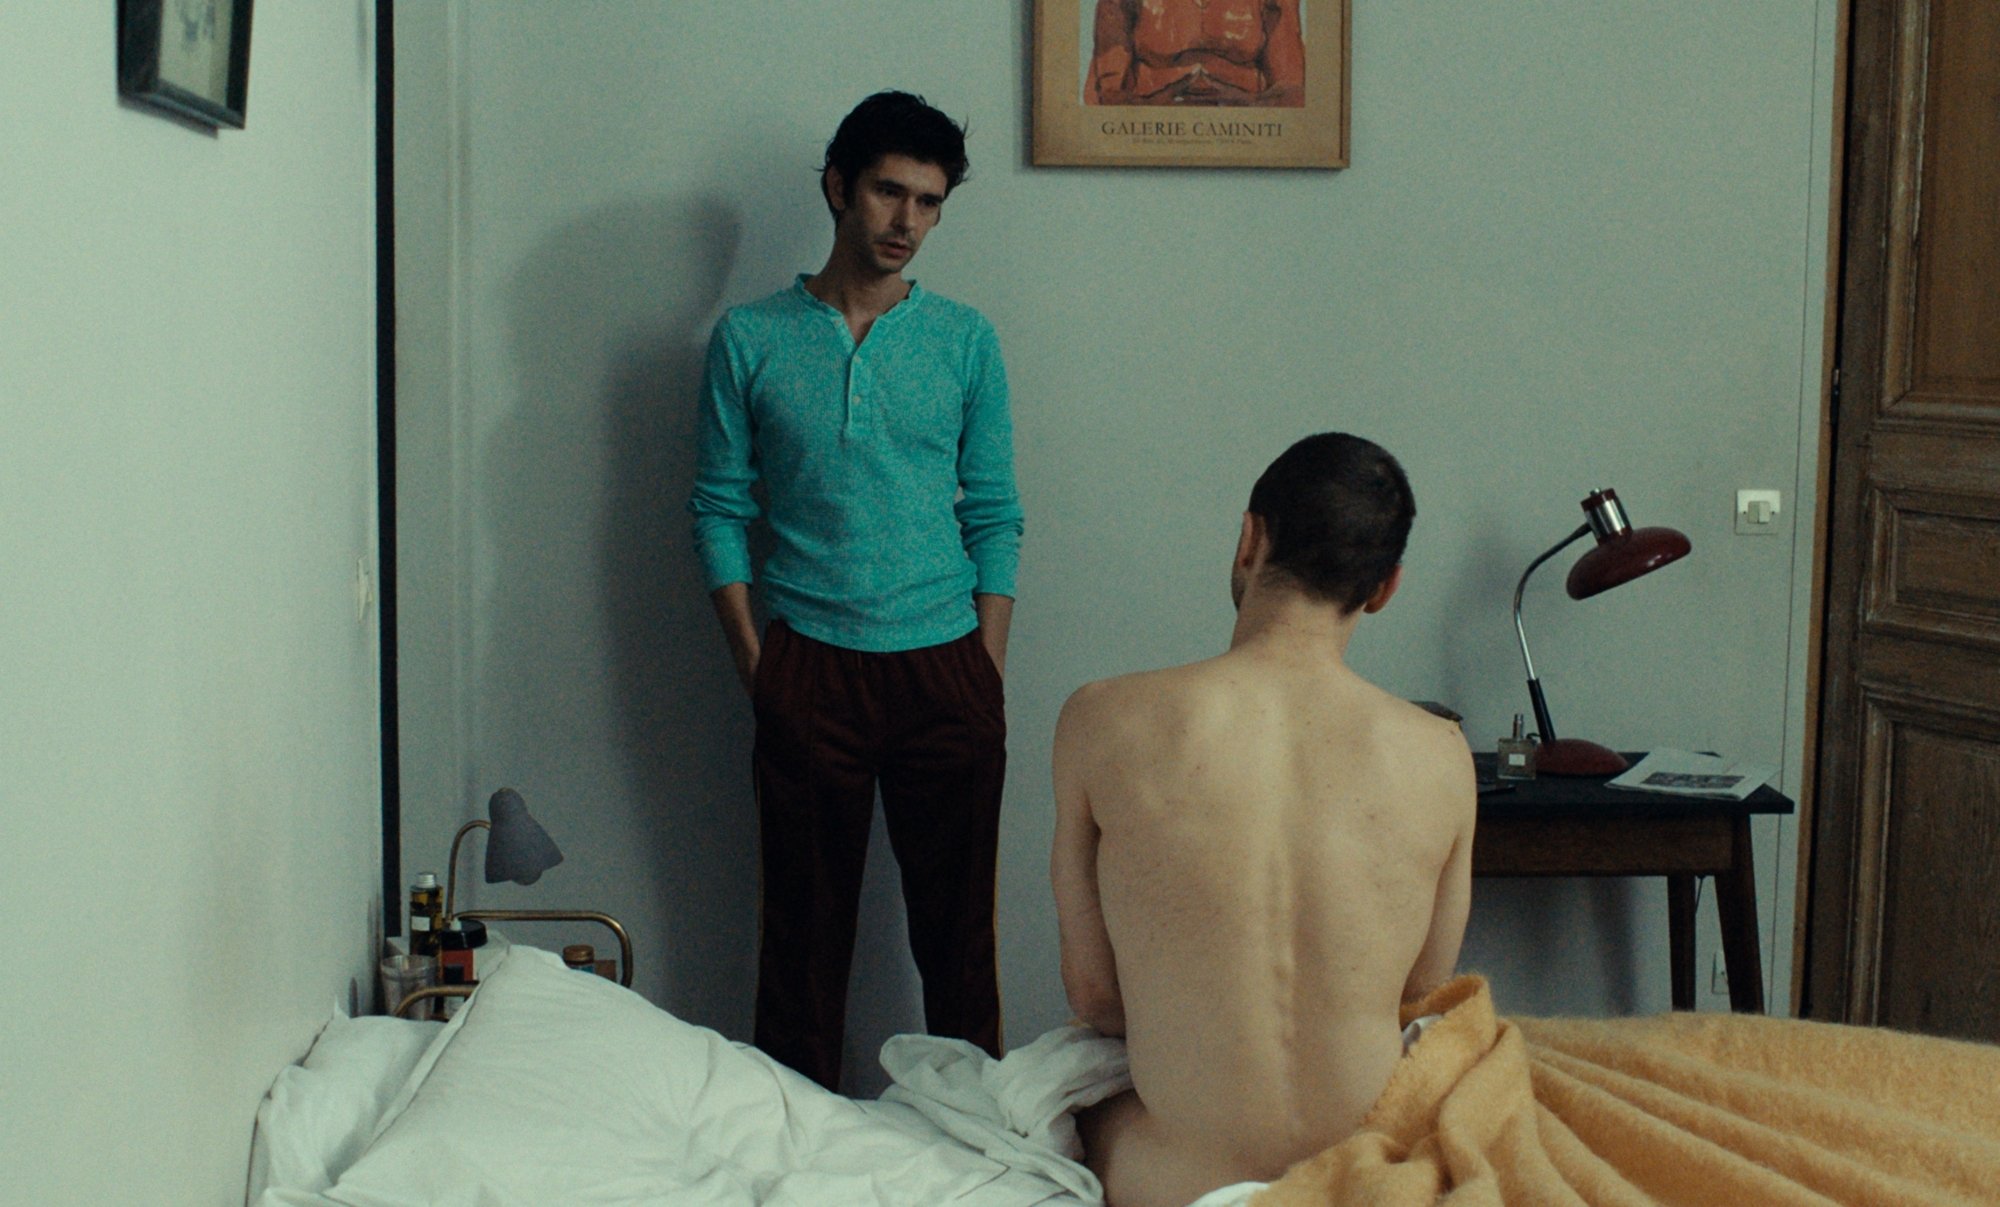 'Passages' Ben Whishaw as Martin and Franz Rogowski as Tomas. Martin is standing with his back to the wall in a bedroom. Tomas is sitting naked on the bed looking at Martin.